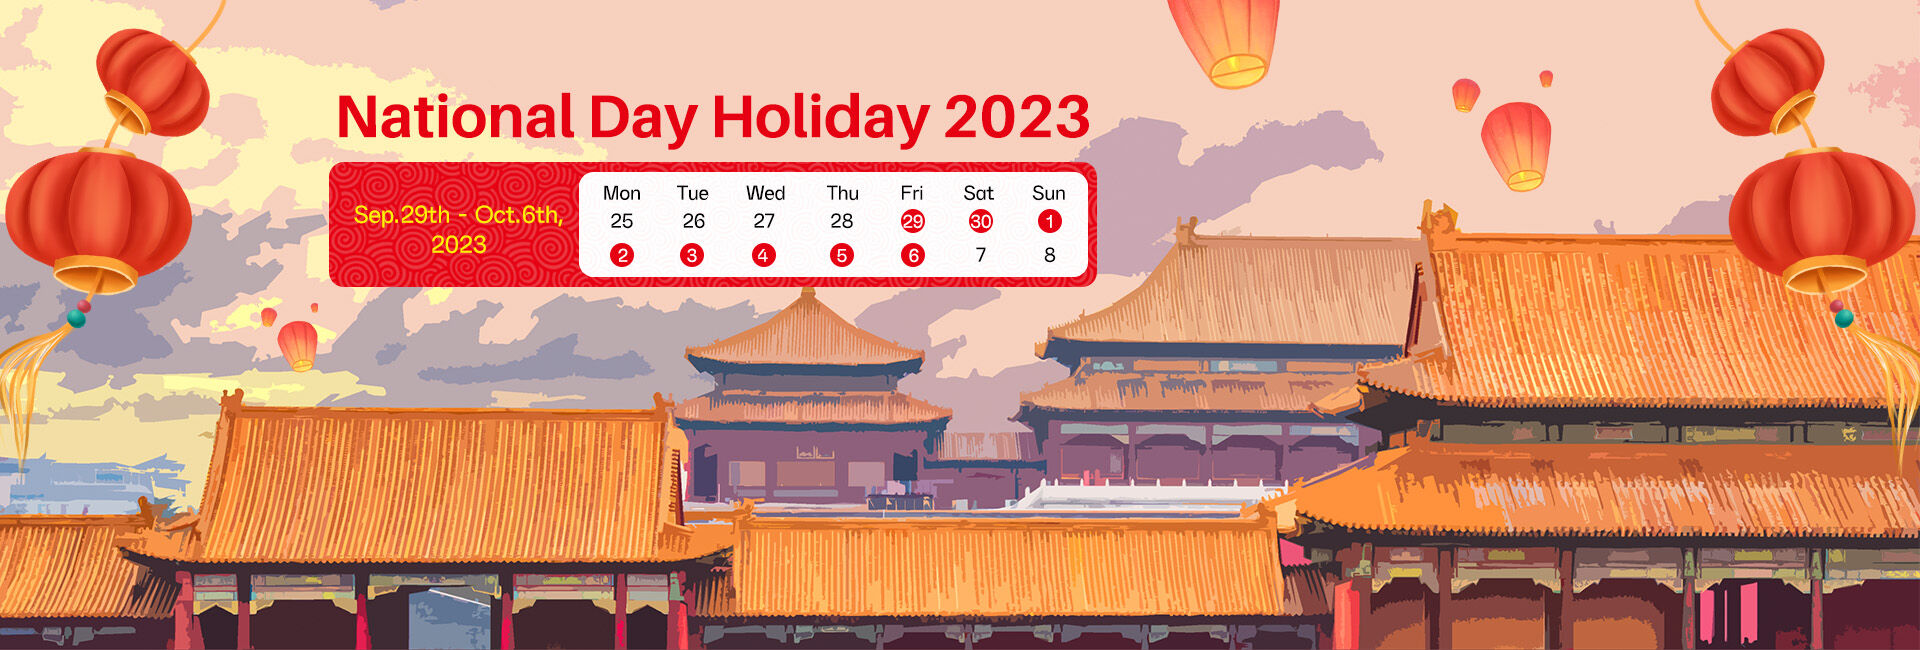 Notice for National Day Holiday 2023